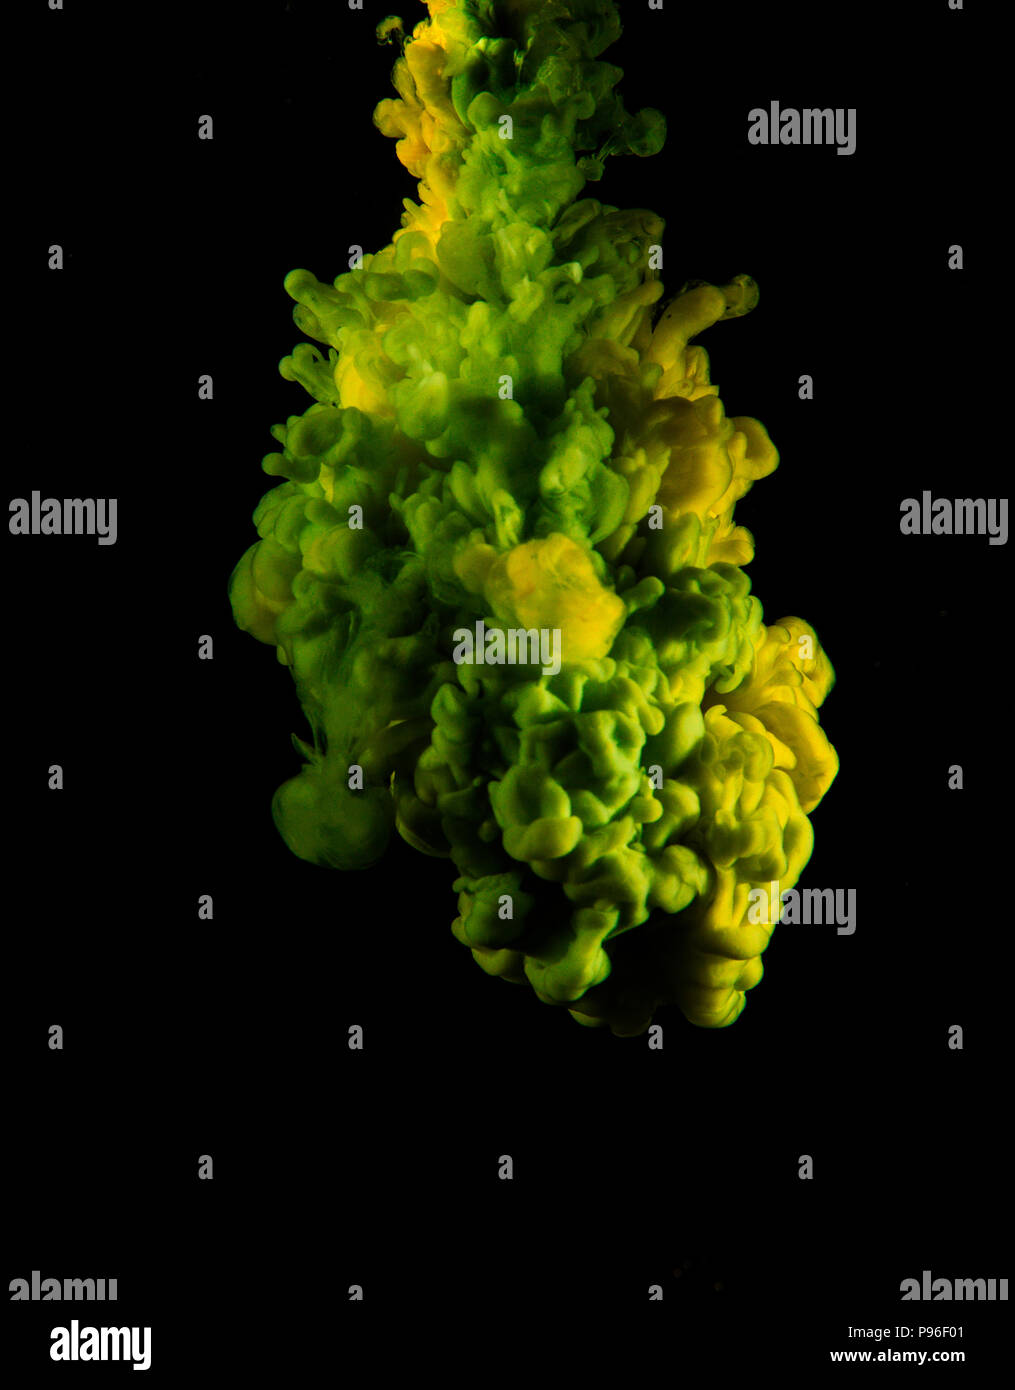 Yellow and Green ink dropping into an abyssal black background and spreading into clouds. Stock Photo